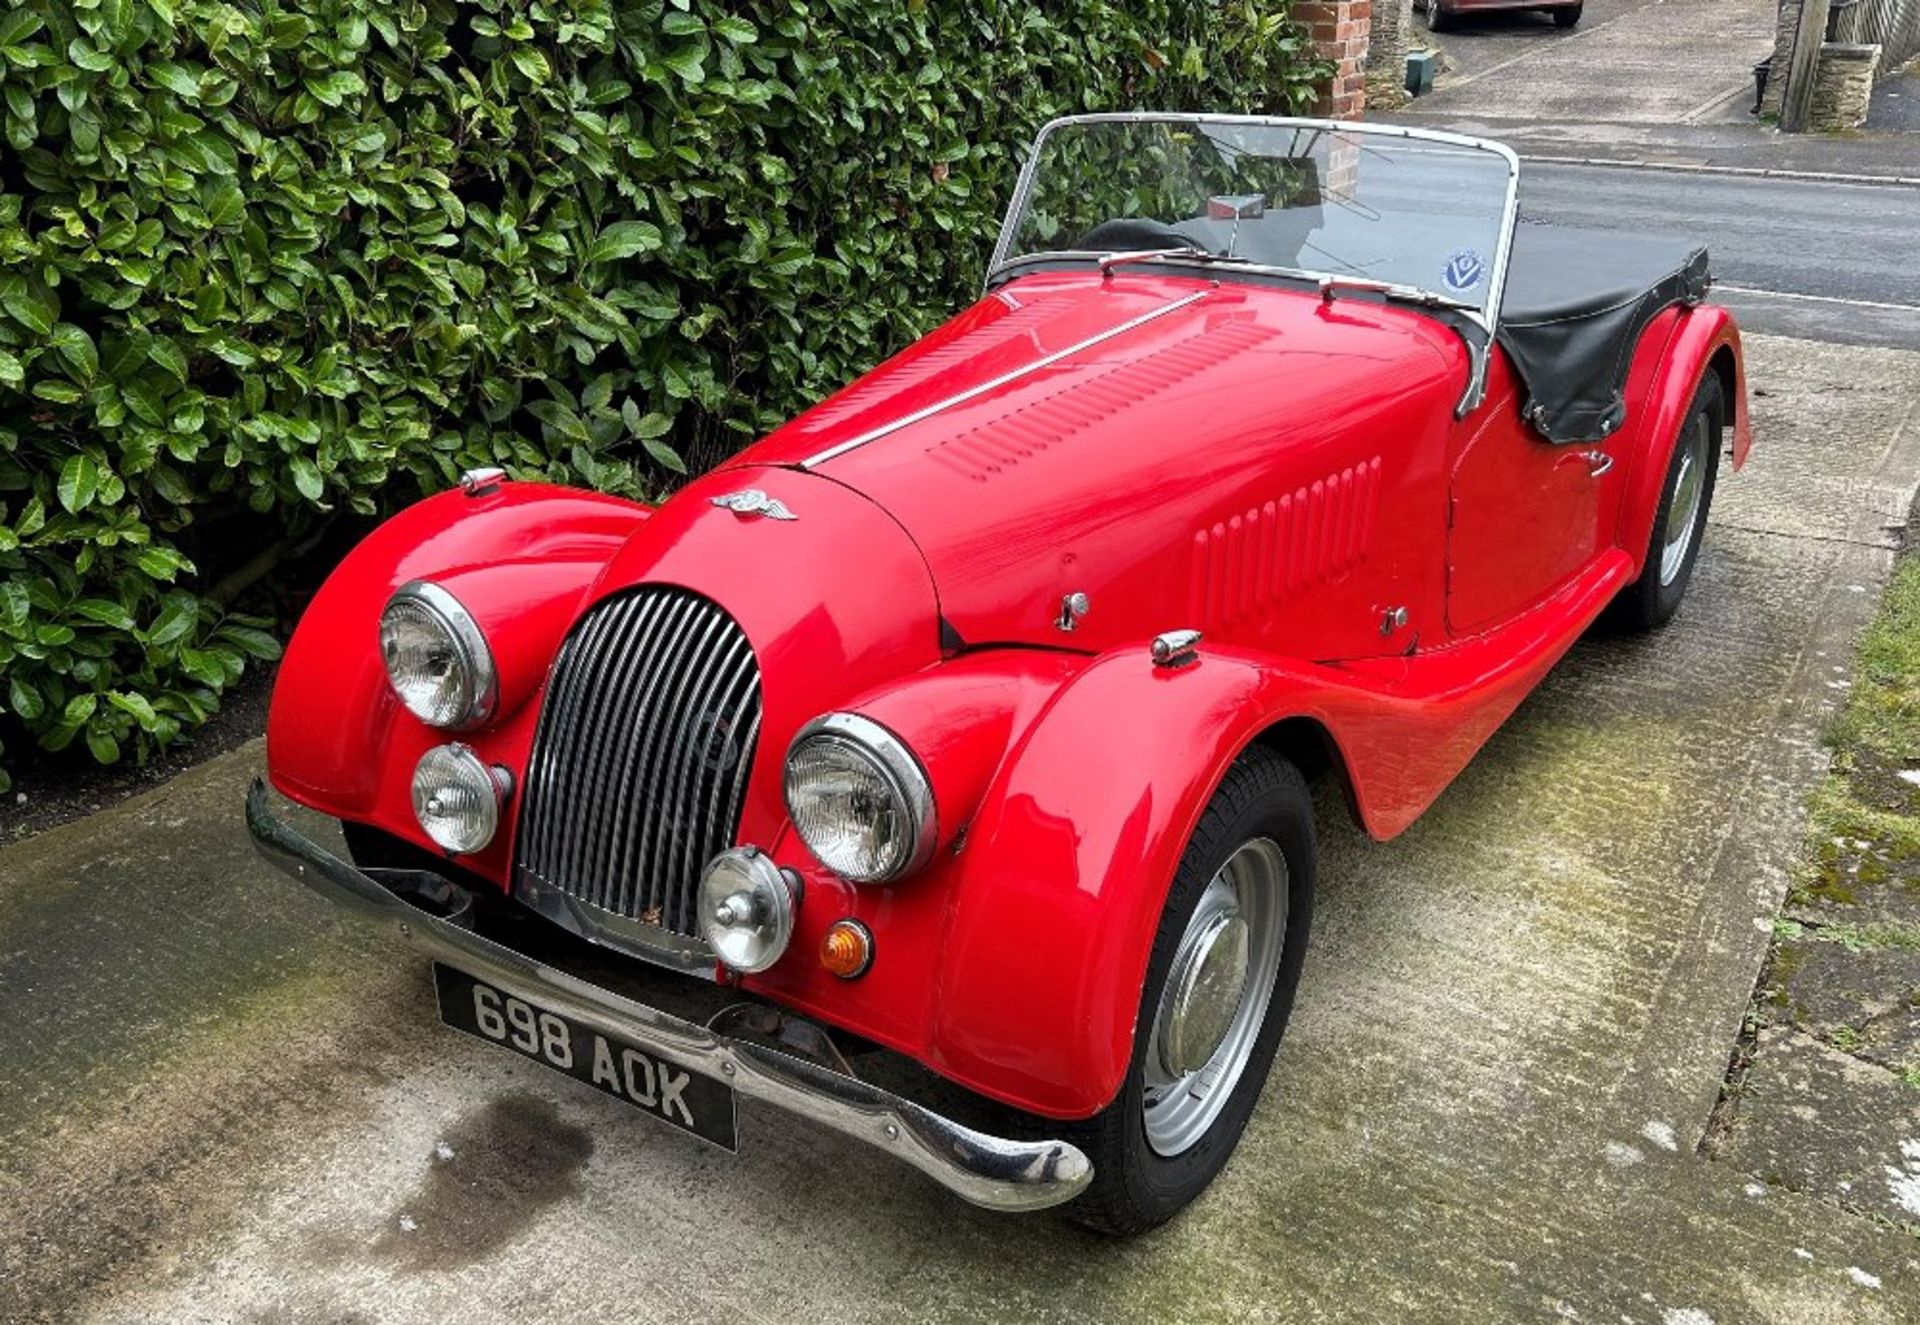 1959 MORGAN PLUS FOUR Registration Number: 698 AOK Chassis Number: 4398 Recorded Mileage: TBA -